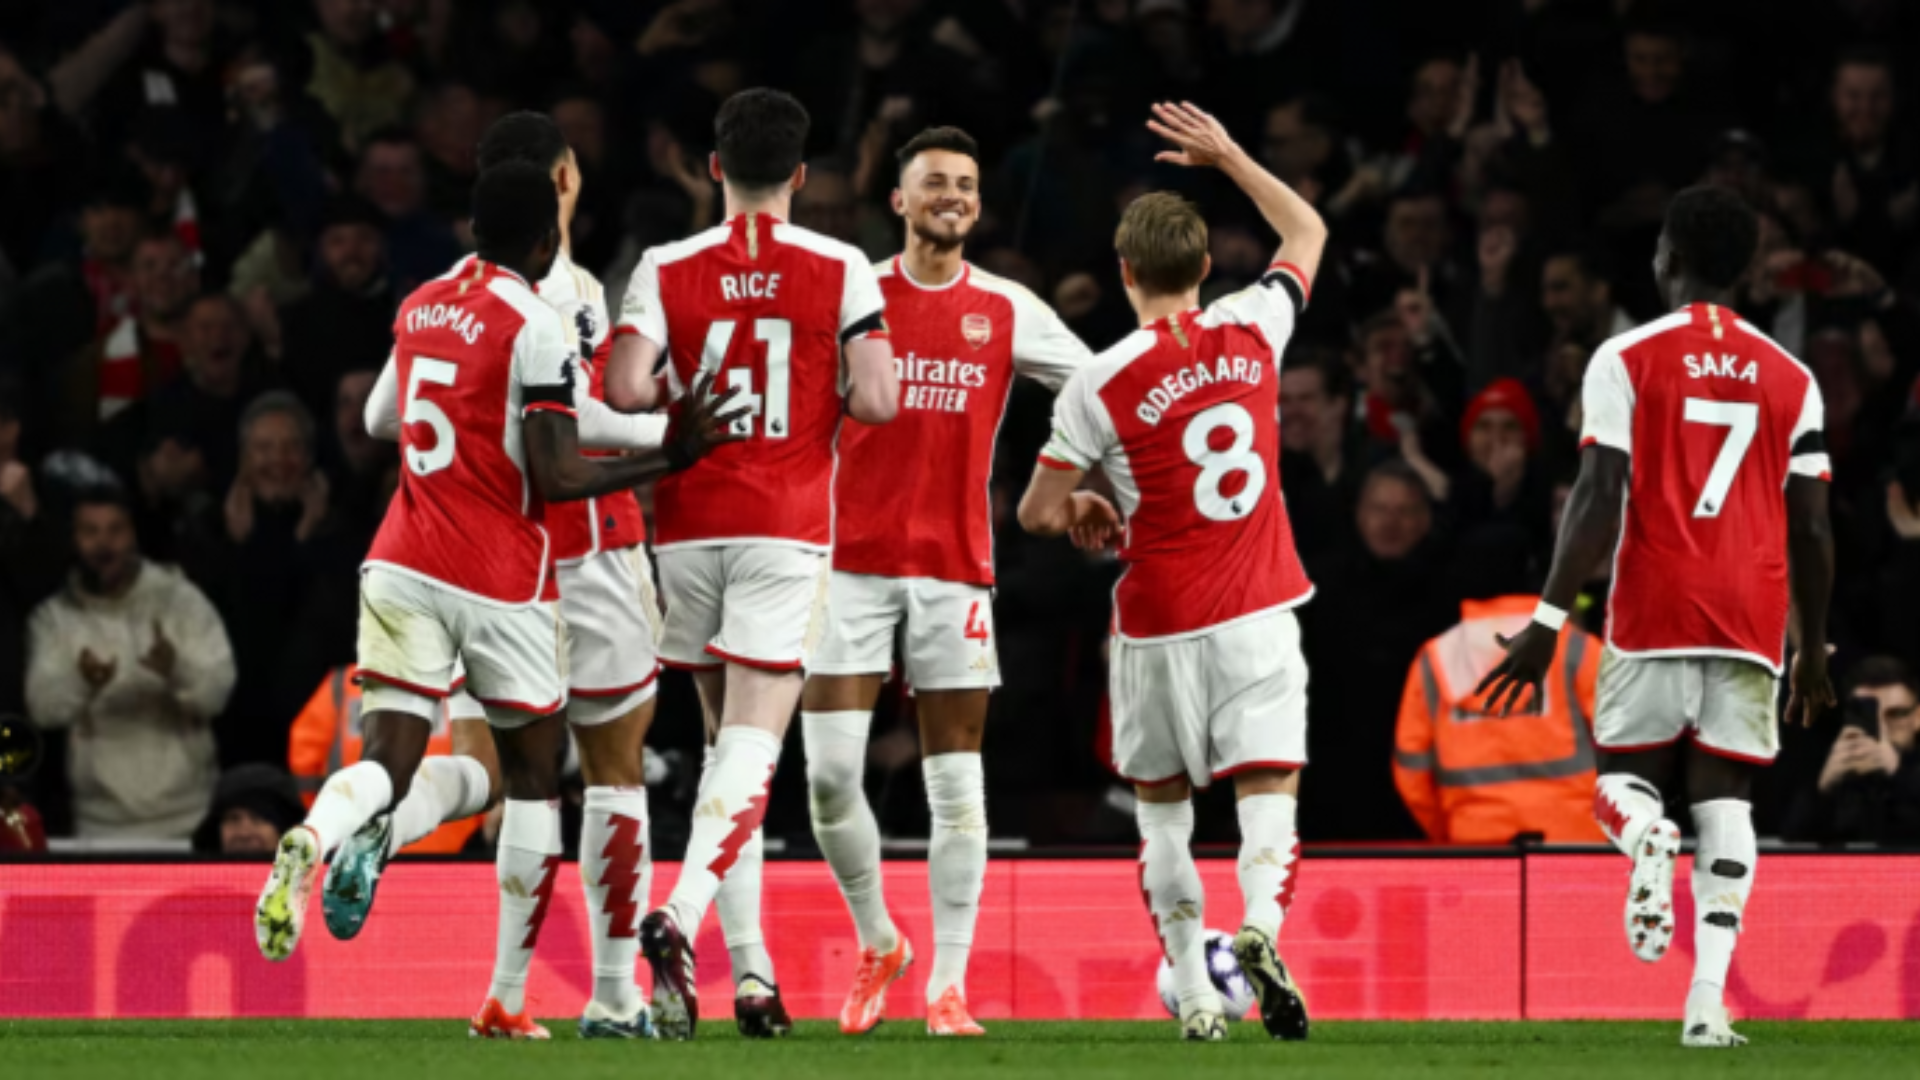 Arsenal's 5-0 win elevates them to Premier League Summit